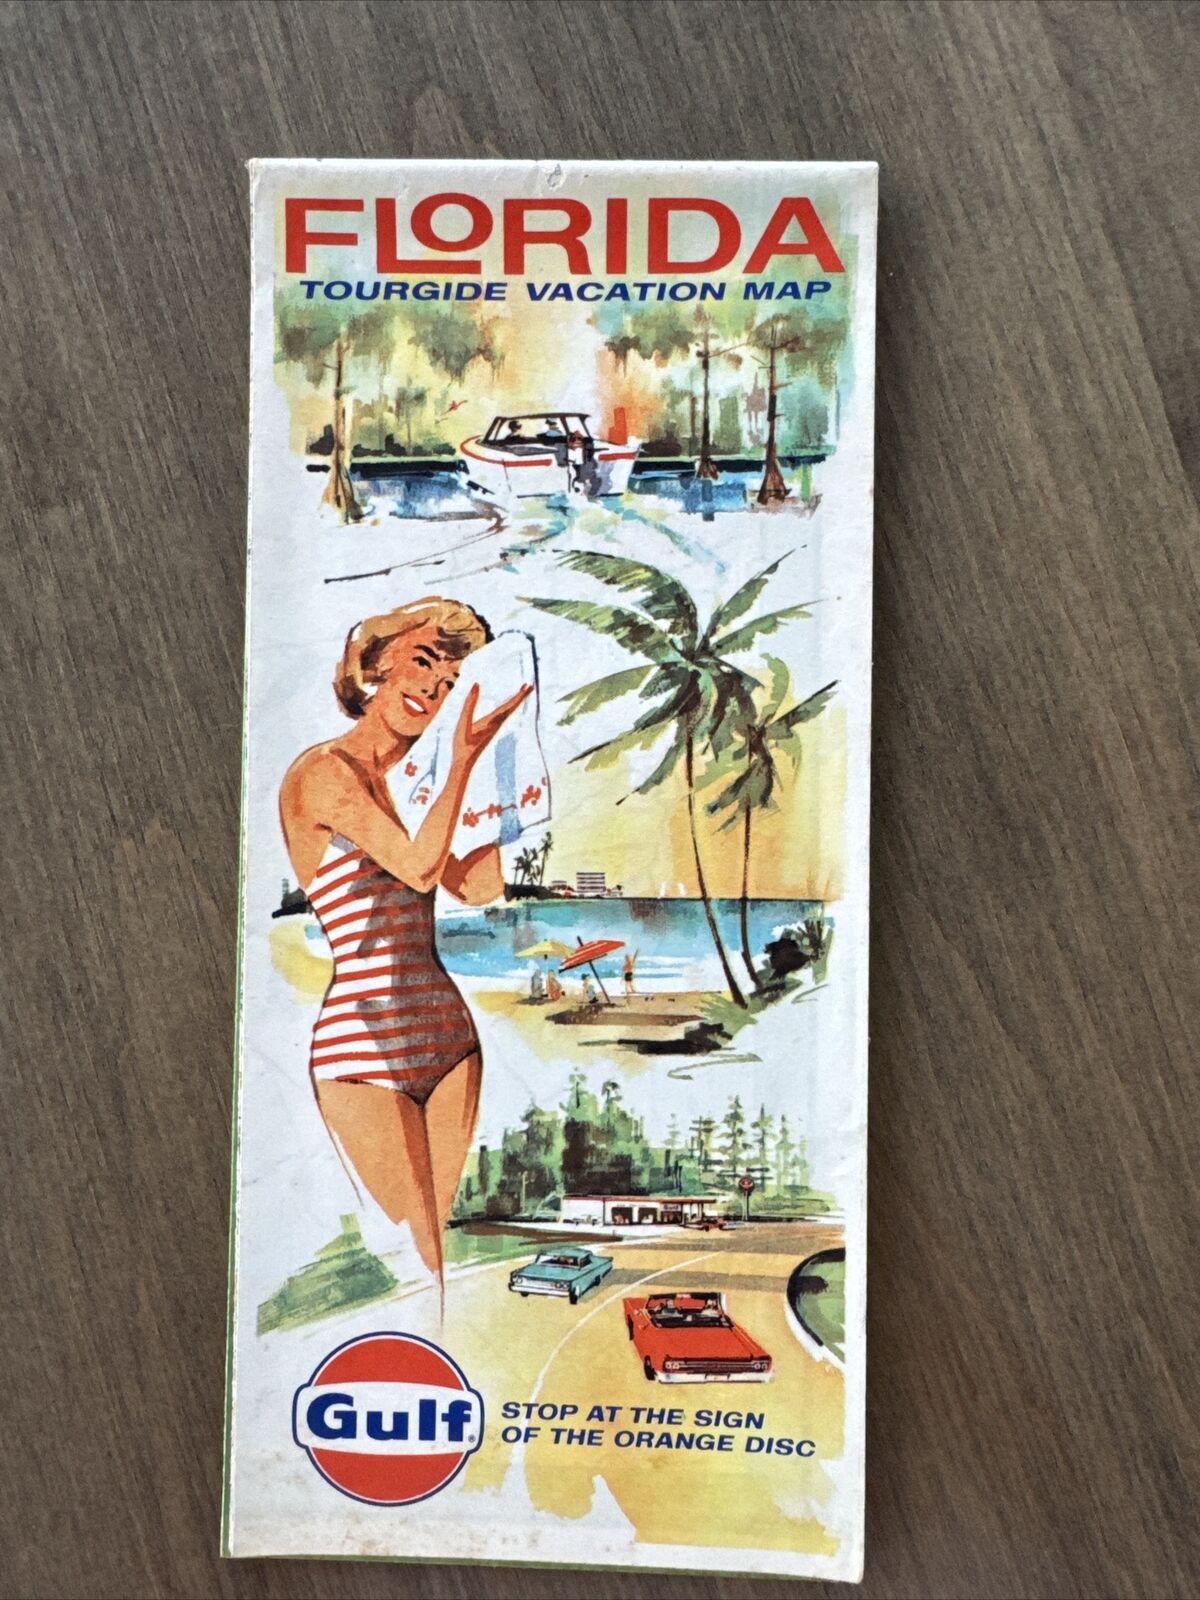 1970 Florida Tourguide Vacation Map Gulf Oil Company